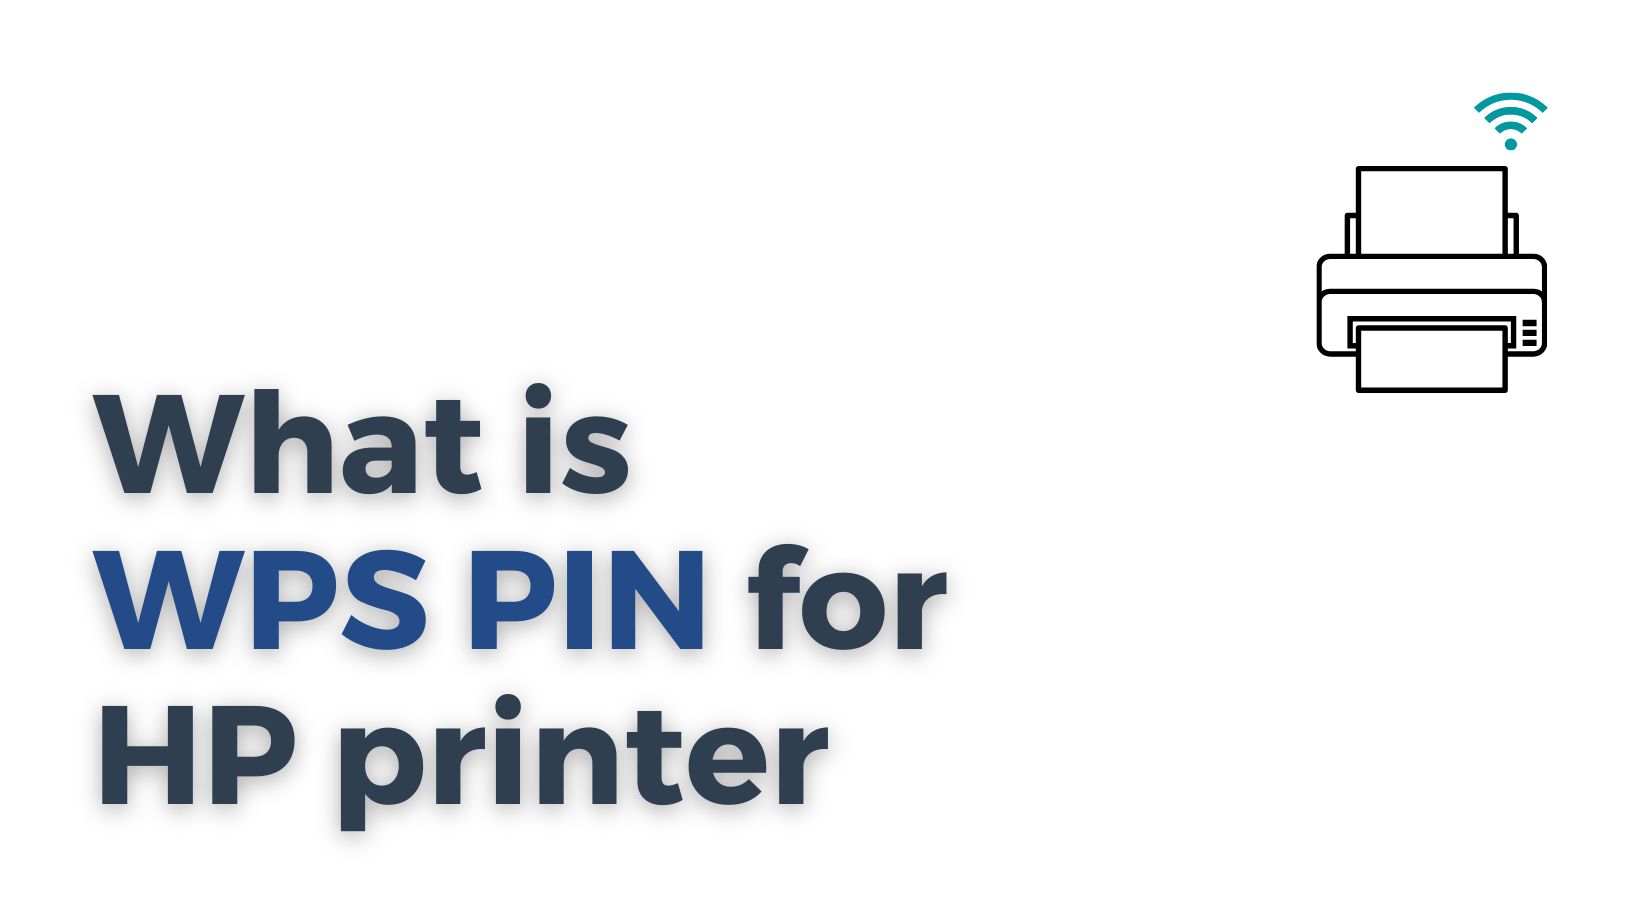 What is WPS PIN for HP printer